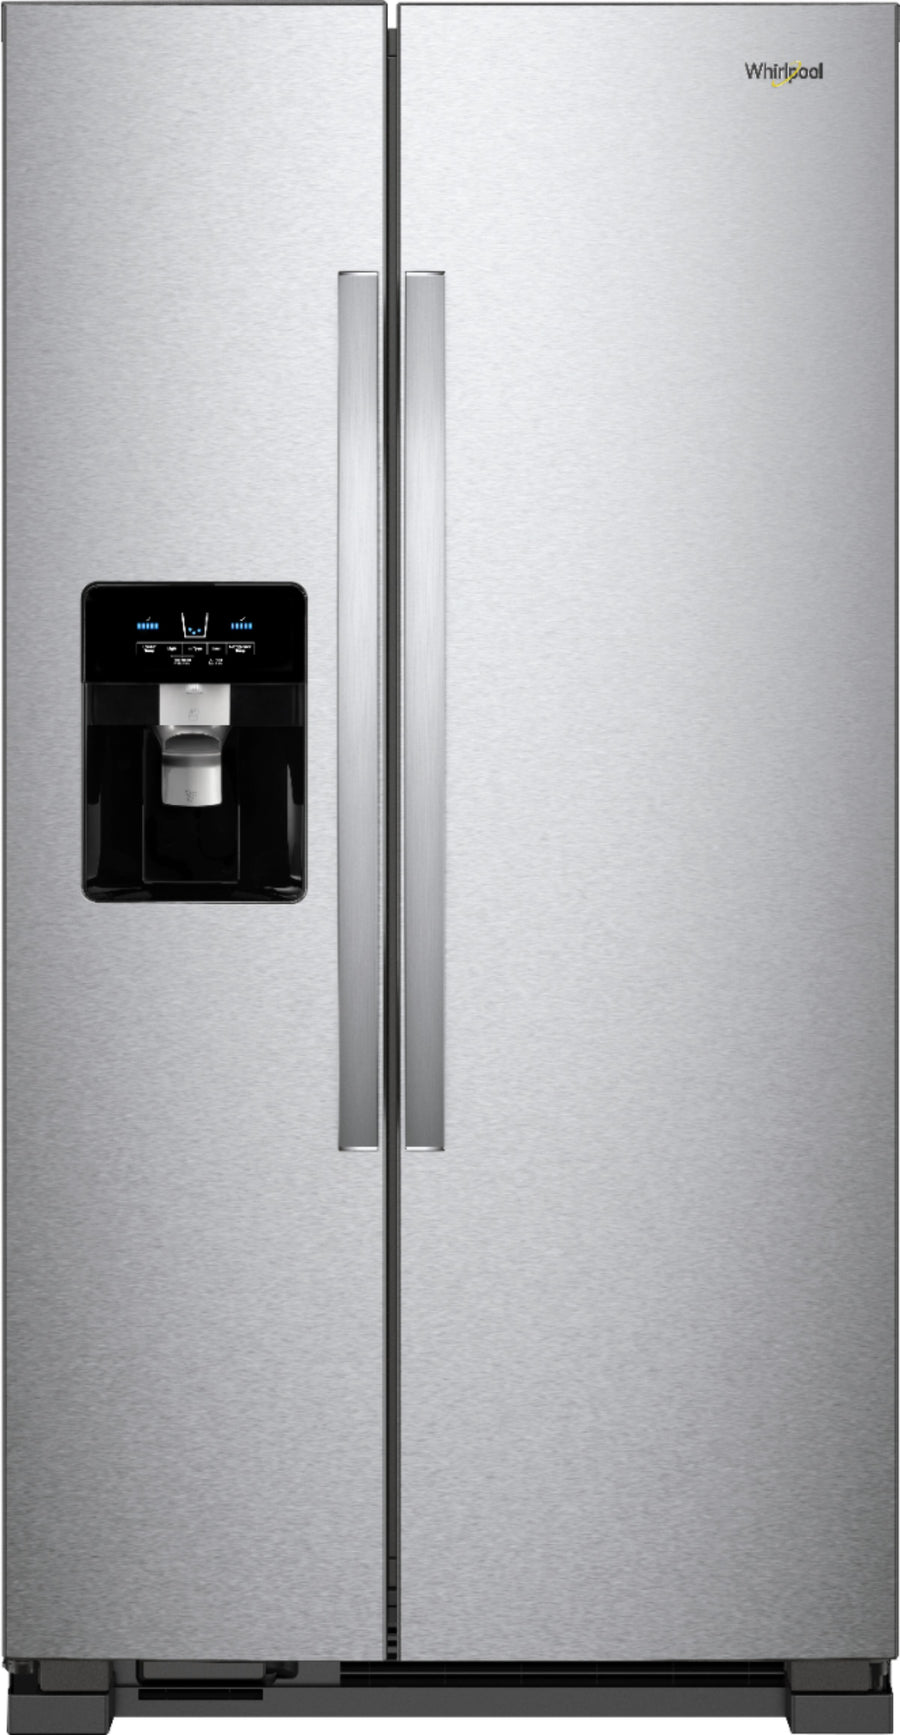 Whirlpool - 24.6 Cu. Ft. Side-by-Side Refrigerator - Stainless steel_0